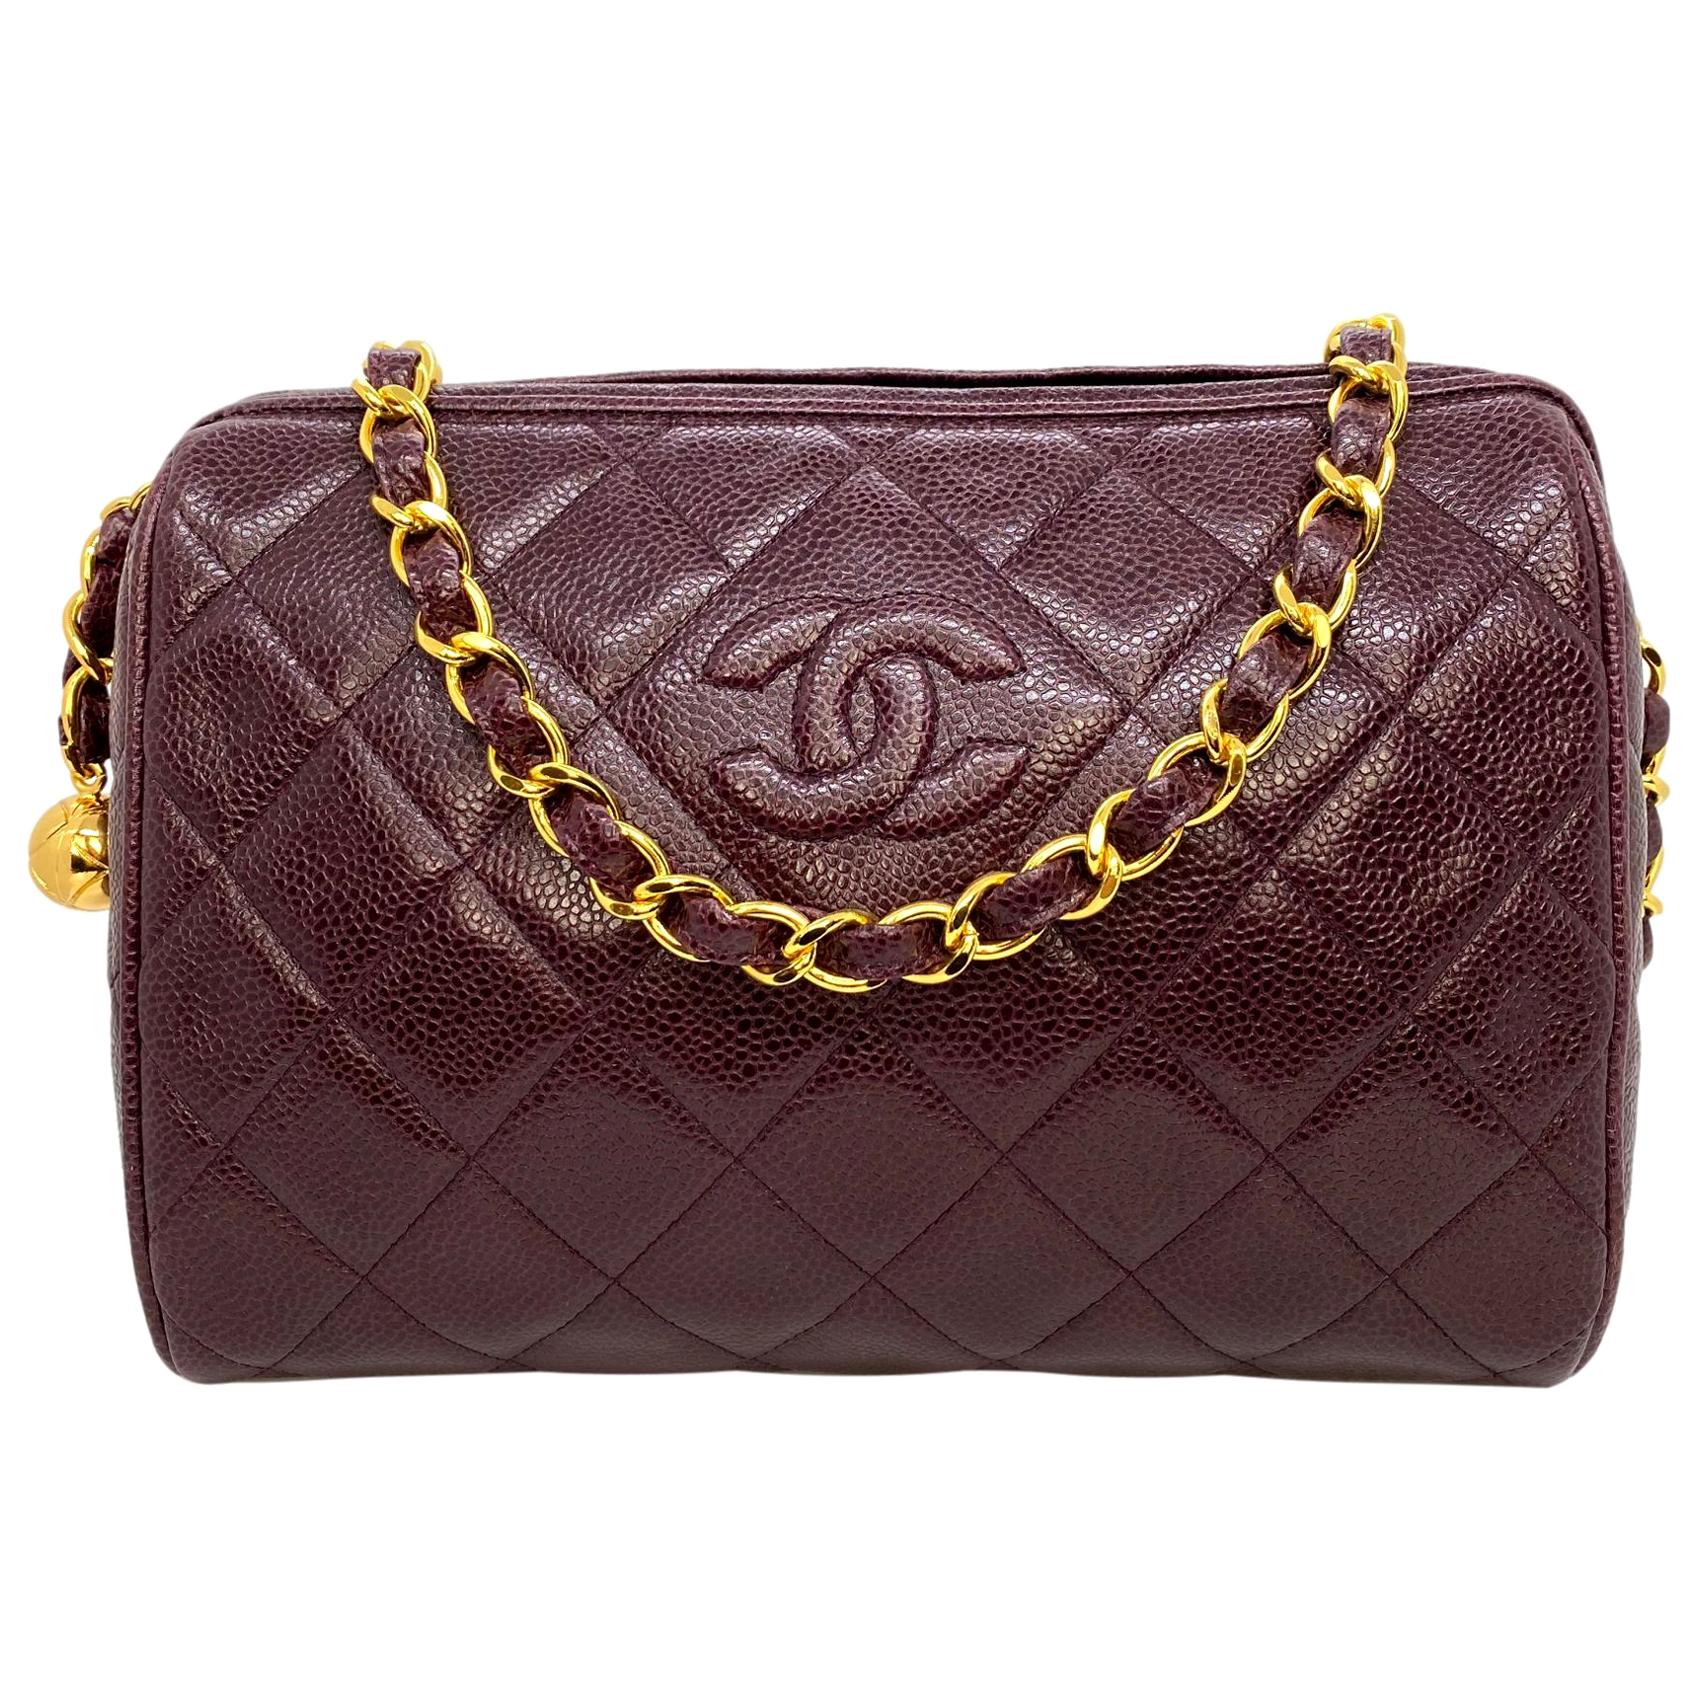 Chanel Vintage Burgundy Quilted Caviar Leather Camera Bag with Gold Hardware